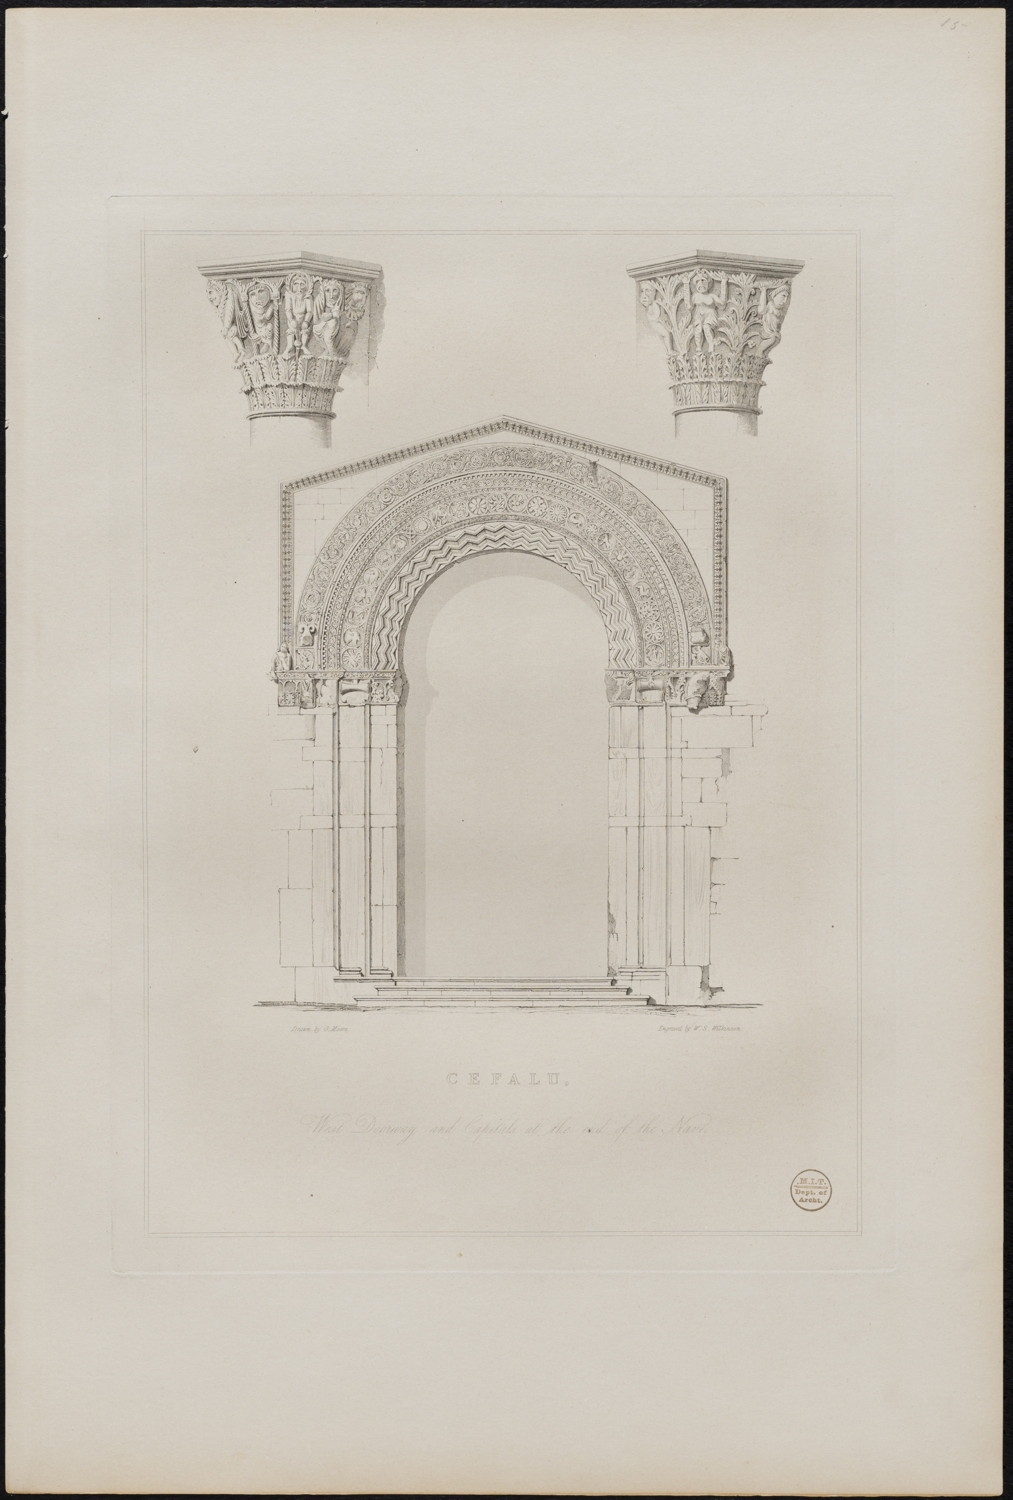 Lithograph of details of Cefalu Cathedral: west doorway and capitals at the end of the nave